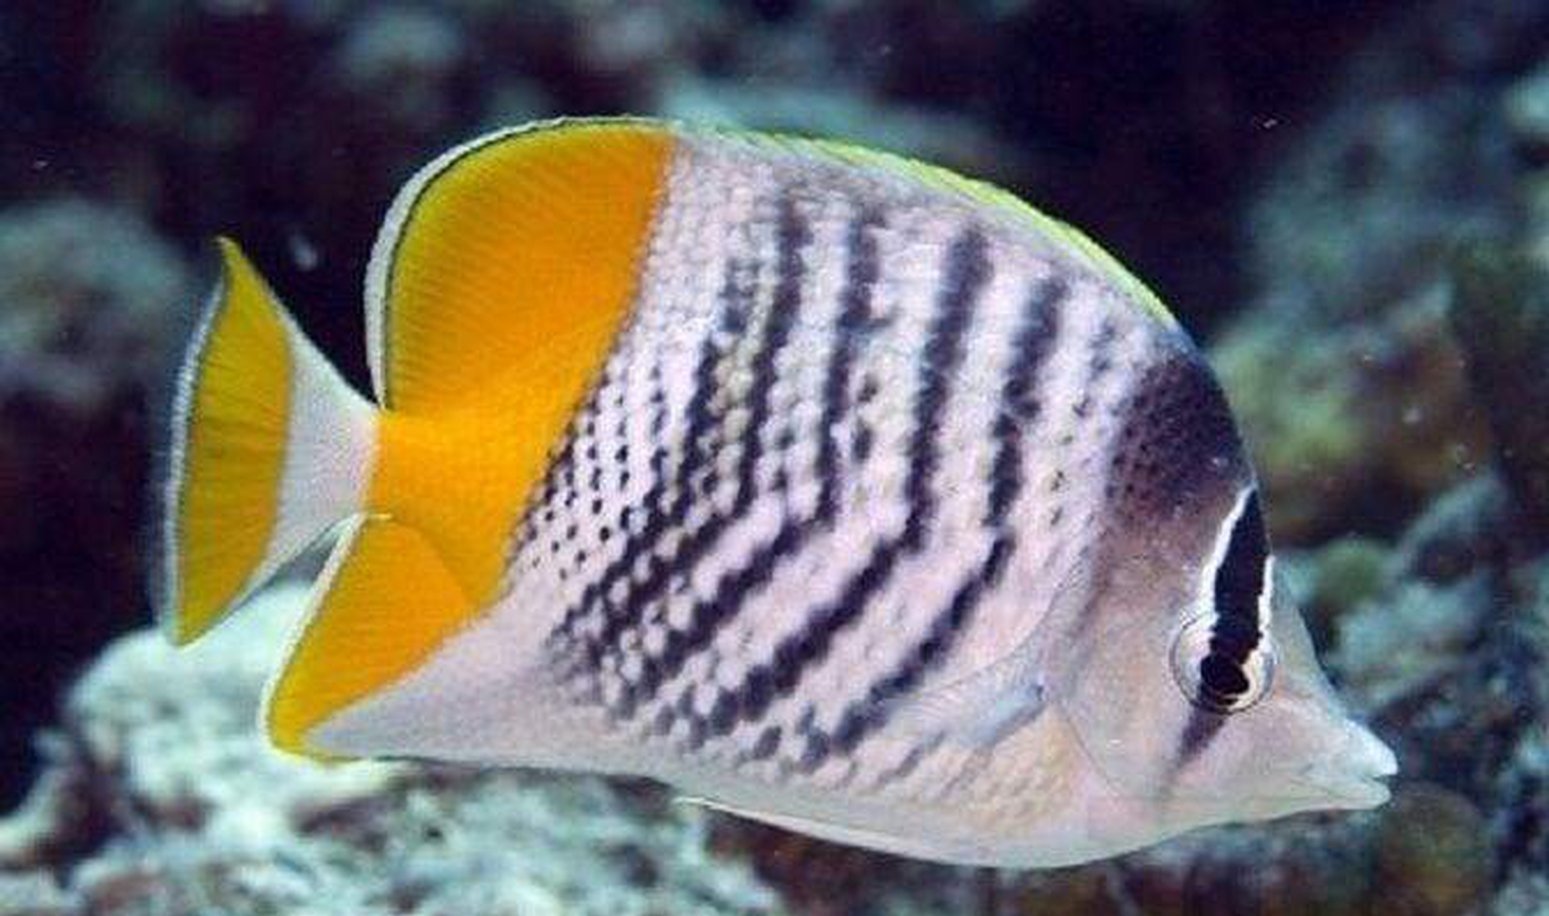 Pearlscale Butterfly Fish - Chaetodon Xanthus - Med 2" - 3" Each Free Shipping-marine fish packages-www.YourFishStore.com